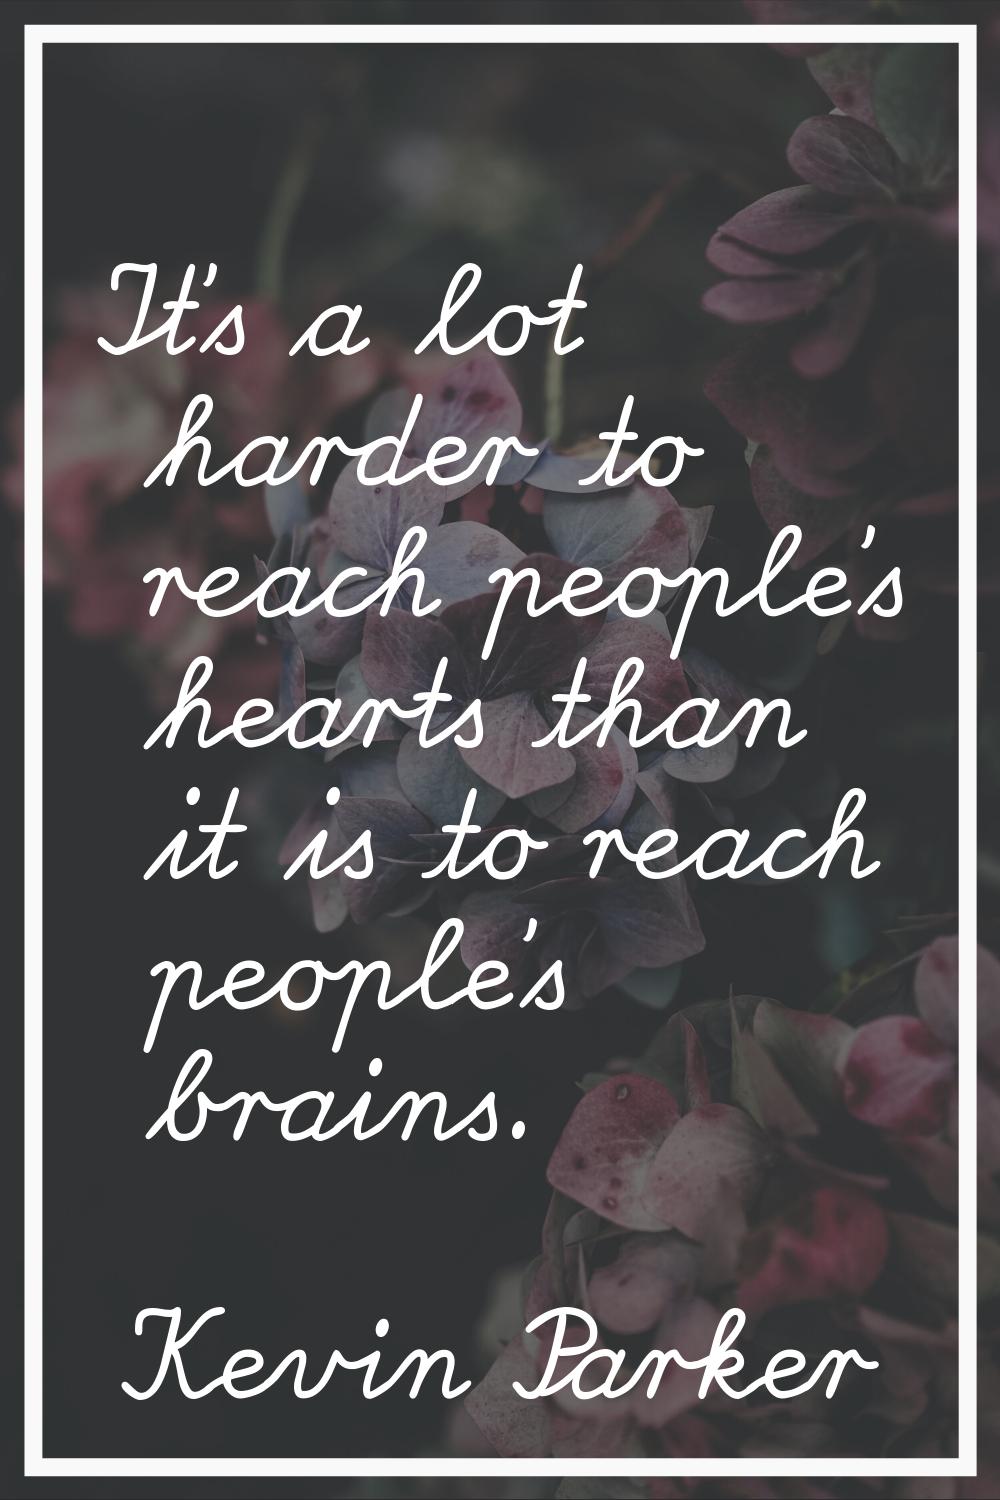 It's a lot harder to reach people's hearts than it is to reach people's brains.